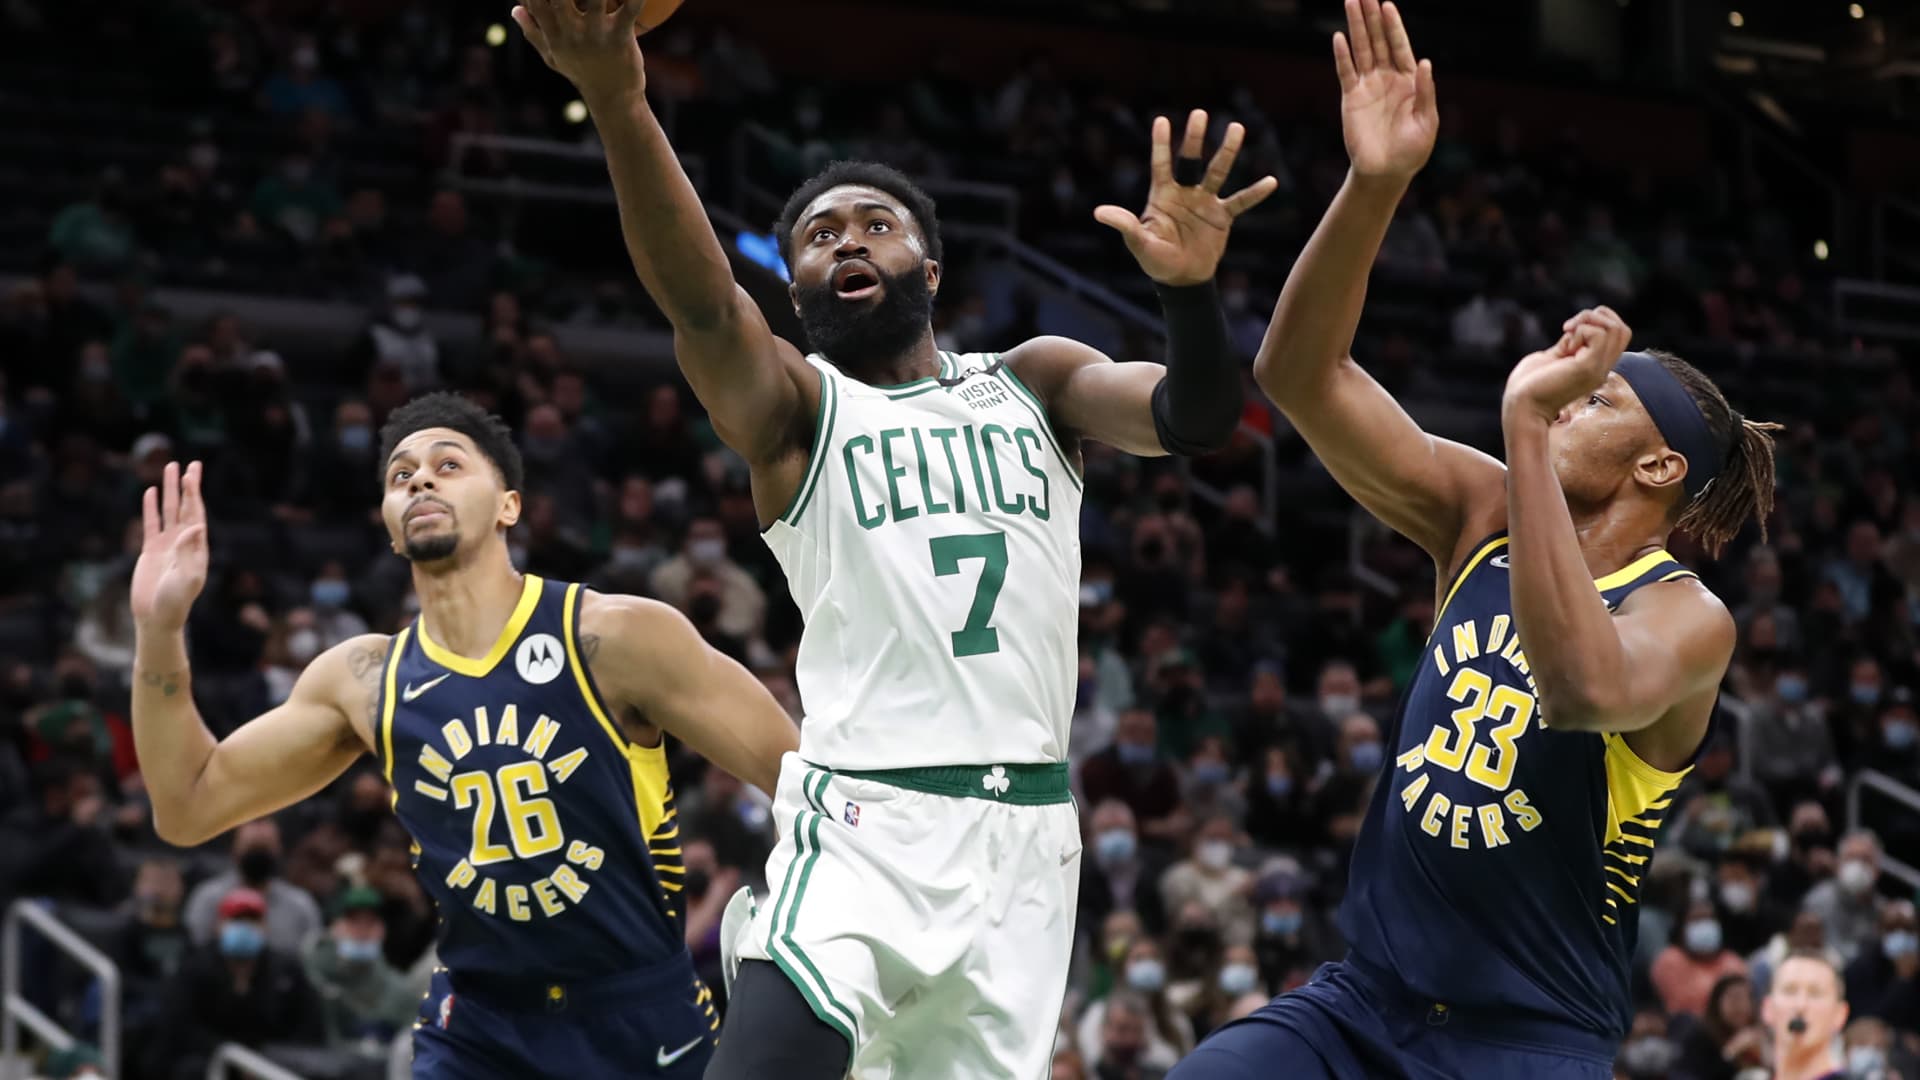 The Celtics Jaylen Brown drives to the basket between the Pacers Jeremy Lamb (left) and Myles Turner (right) in a regular season NBA basketball game at TD Garden in Boston on Jan. 10. 2022.